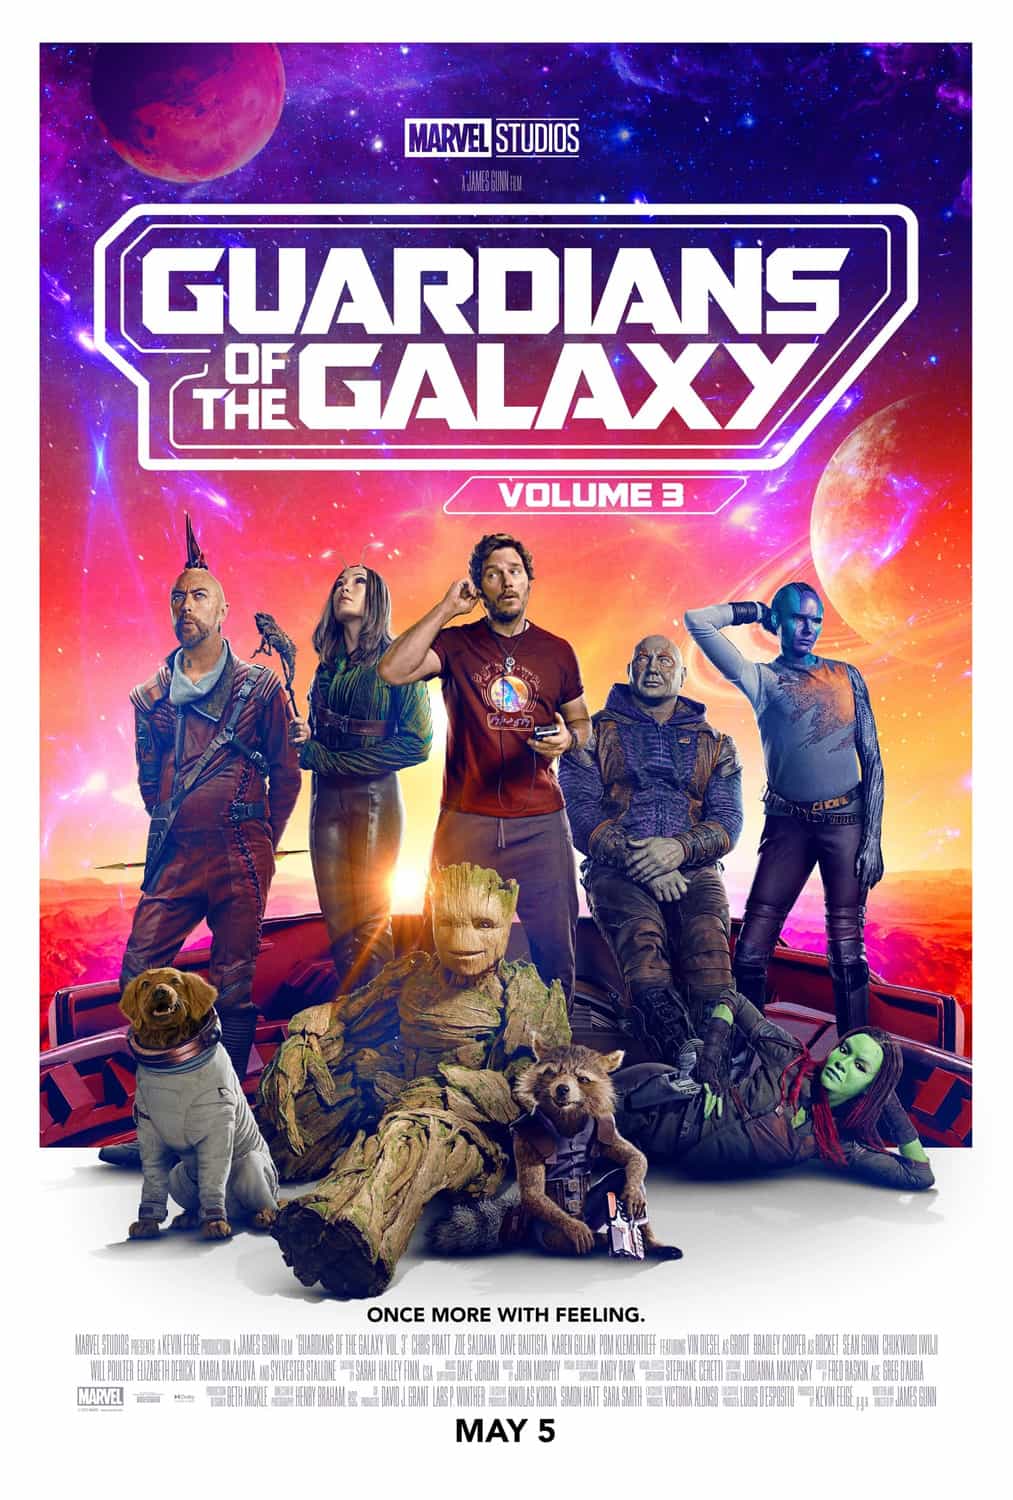 US Box Office Weekend Report 12th - 14th May 2023:  With weak new releases providing no challenge Guardians of the Galaxy 3 spends a second weekend at the top